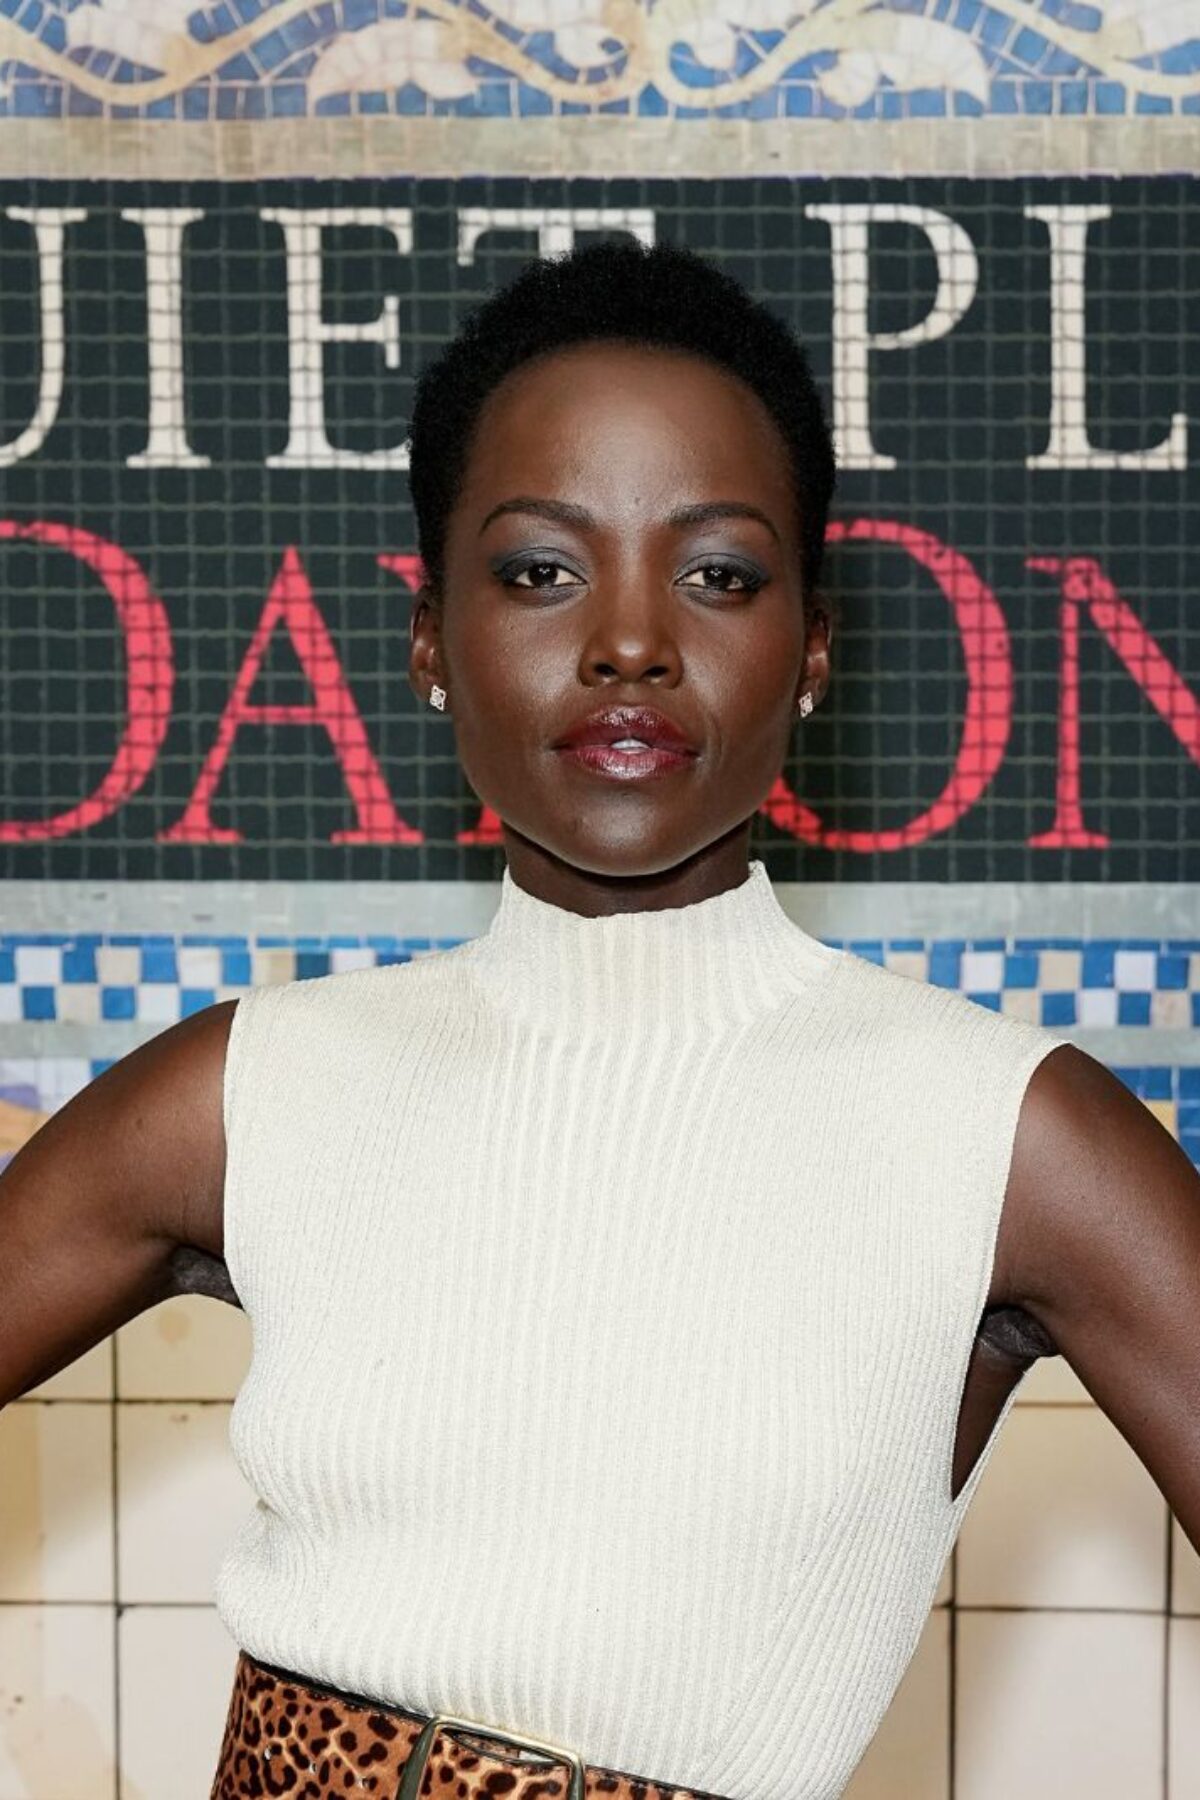 NEW YORK, NEW YORK - JUNE 23: Lupita Nyong'o attends a NYC photocall in support of 